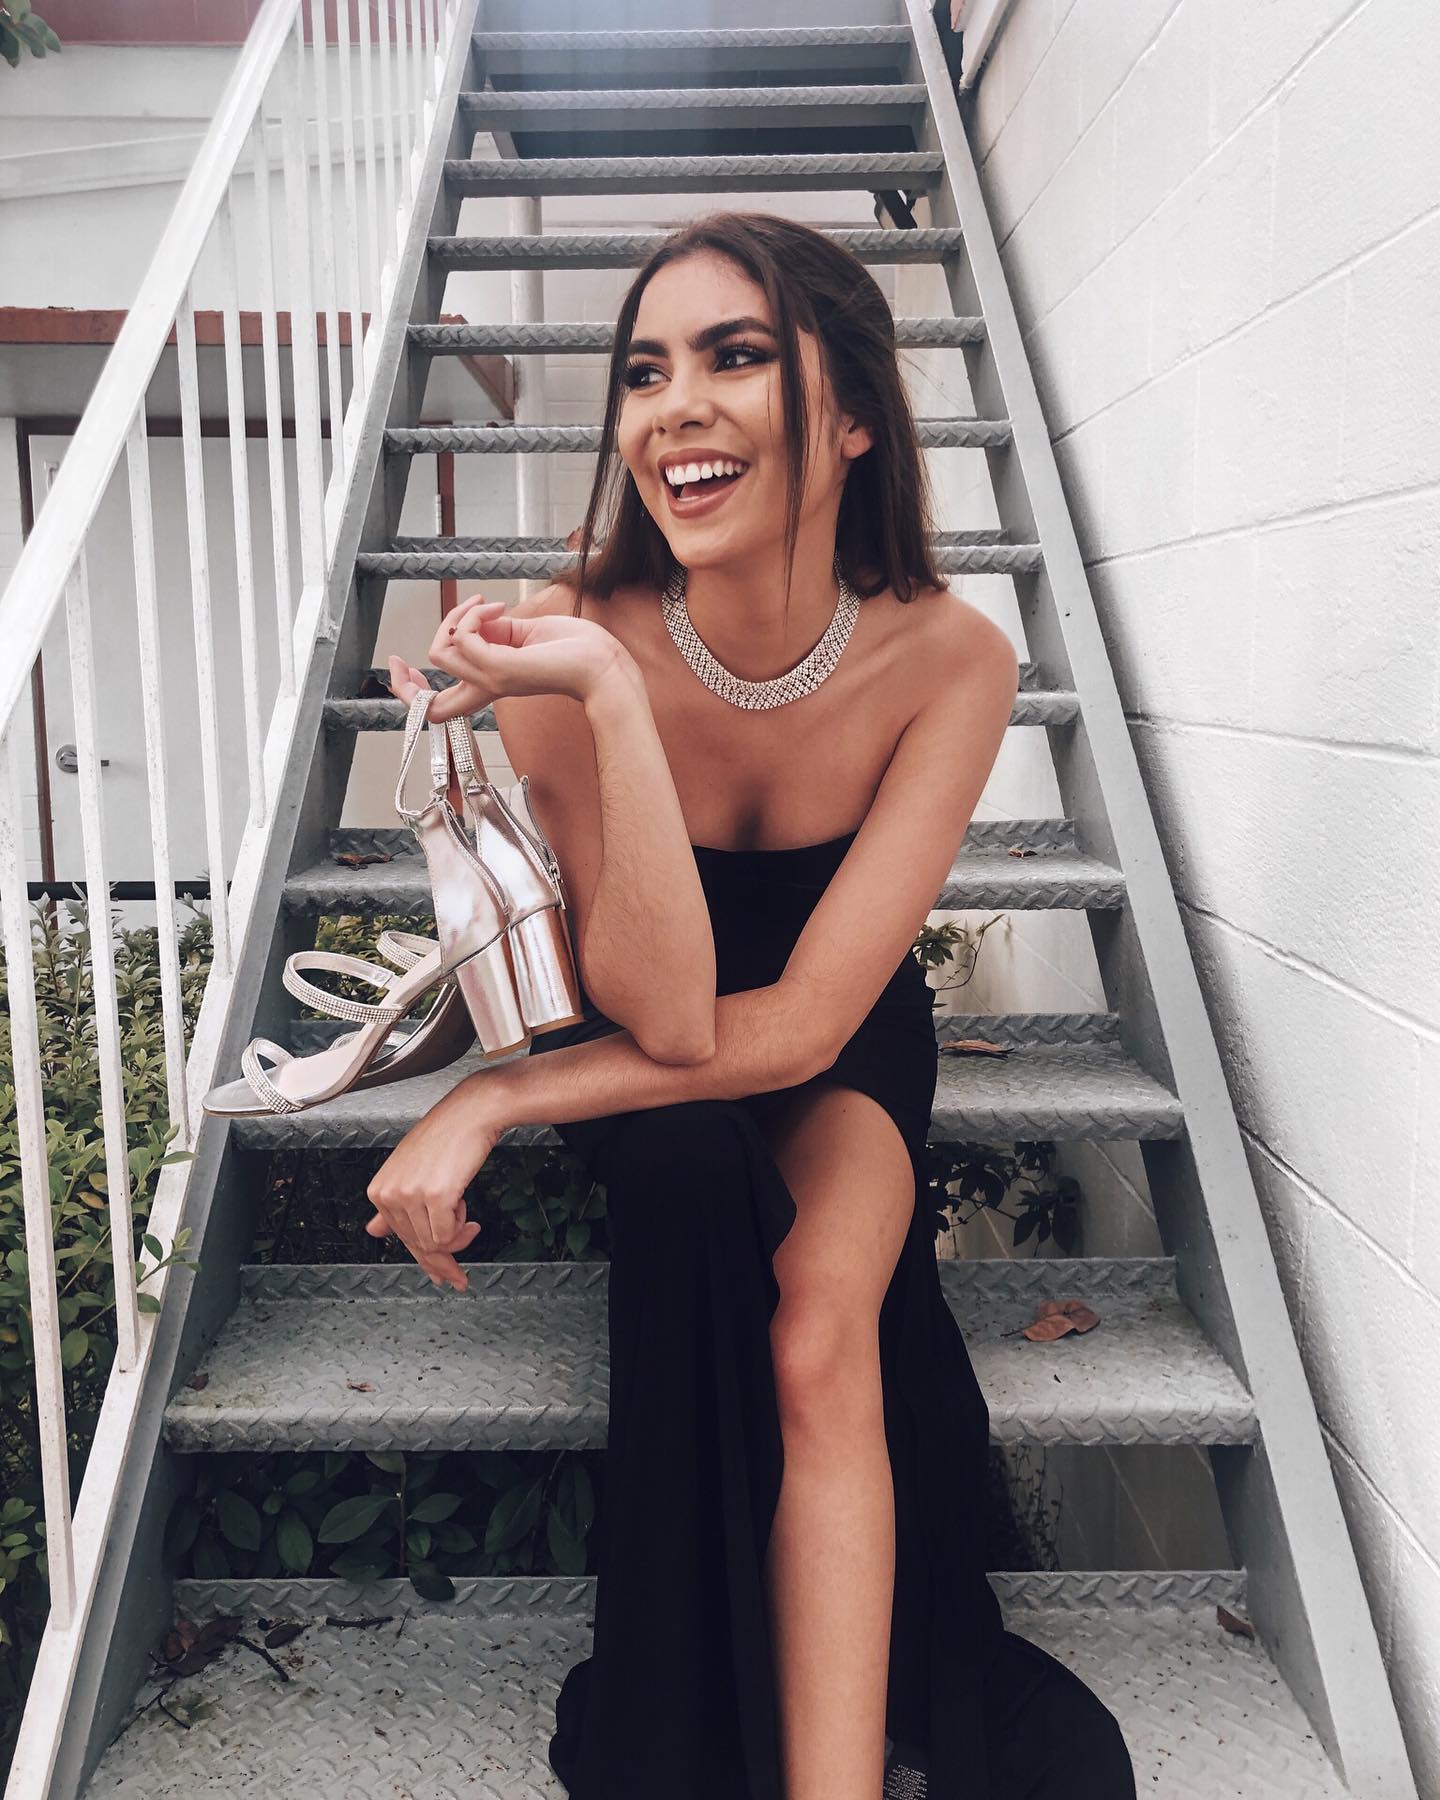 Girl in long black strapless dress sitting on stairs holding heels